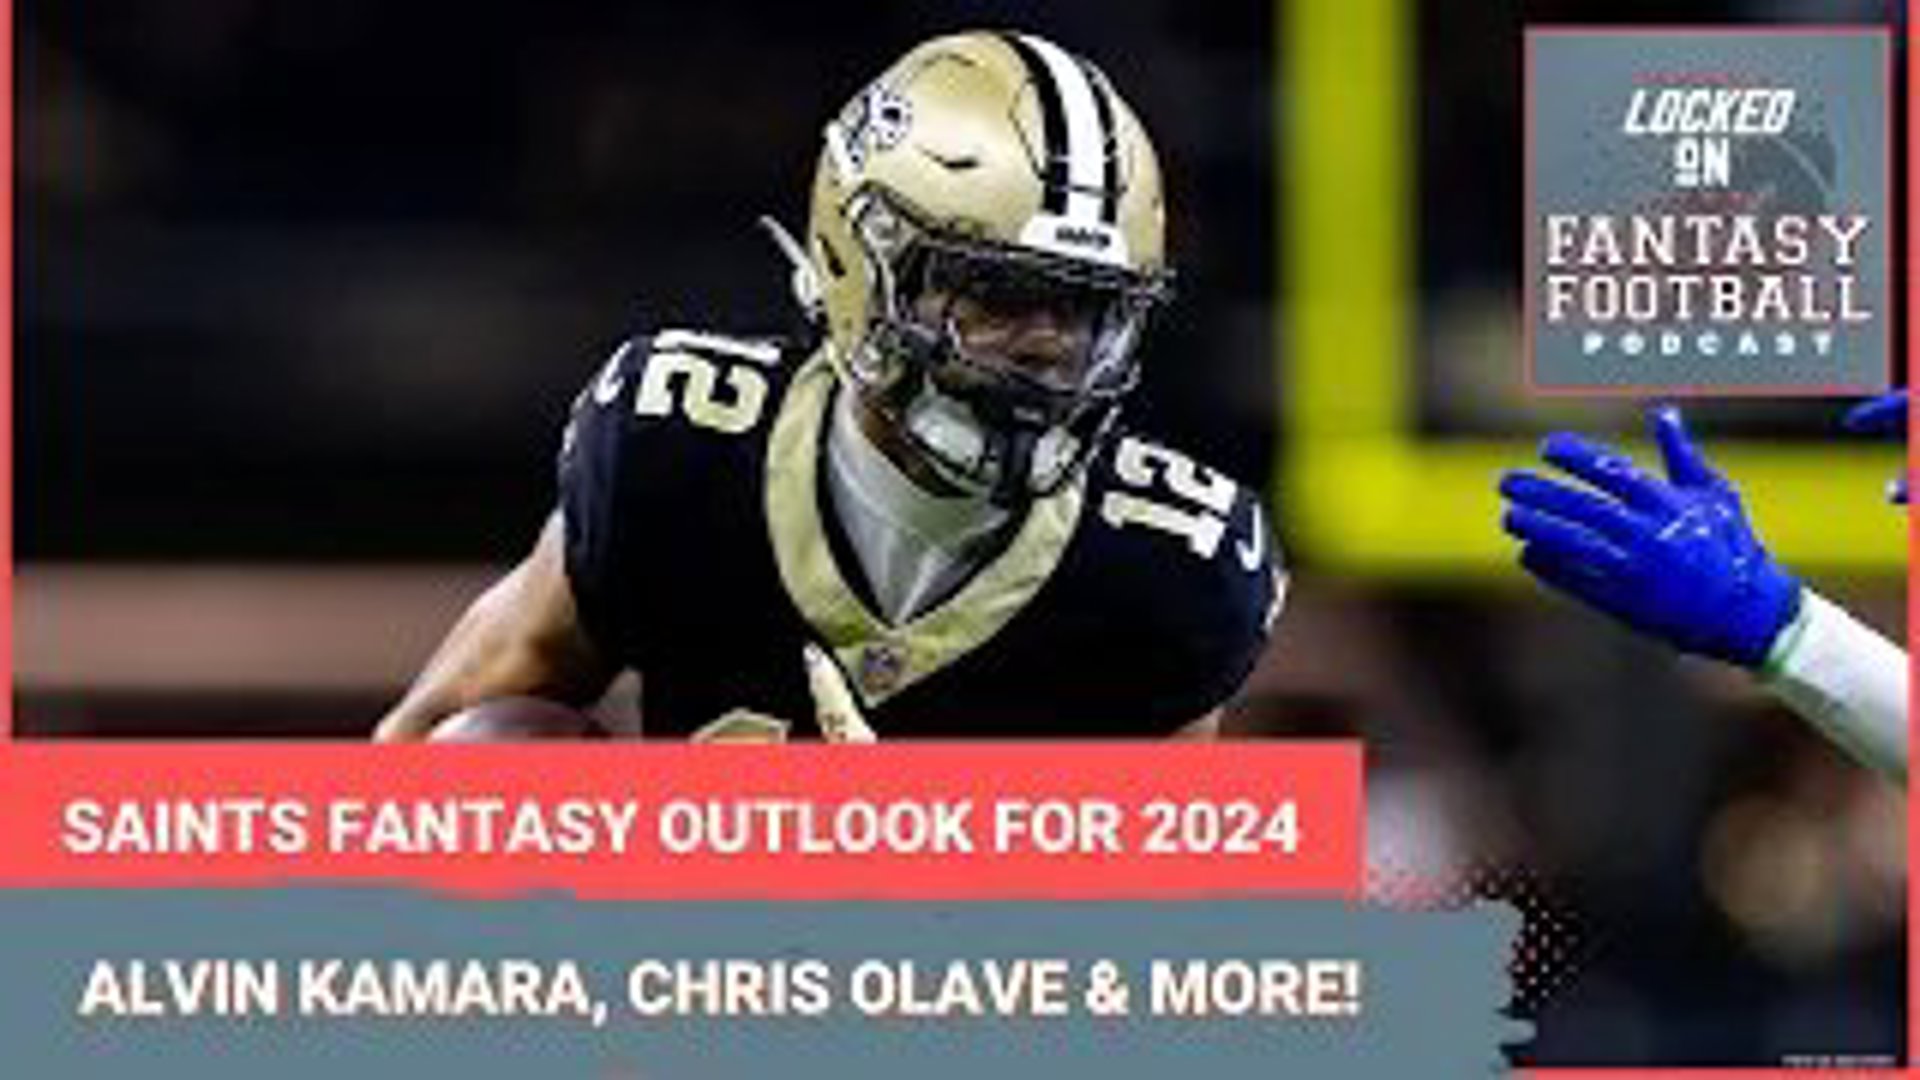 Sporting News.com's Vinnie Iyer and NFL.com's Michelle Magdziuk break down the fantasy football potential of the 2024 New Orleans Saints.